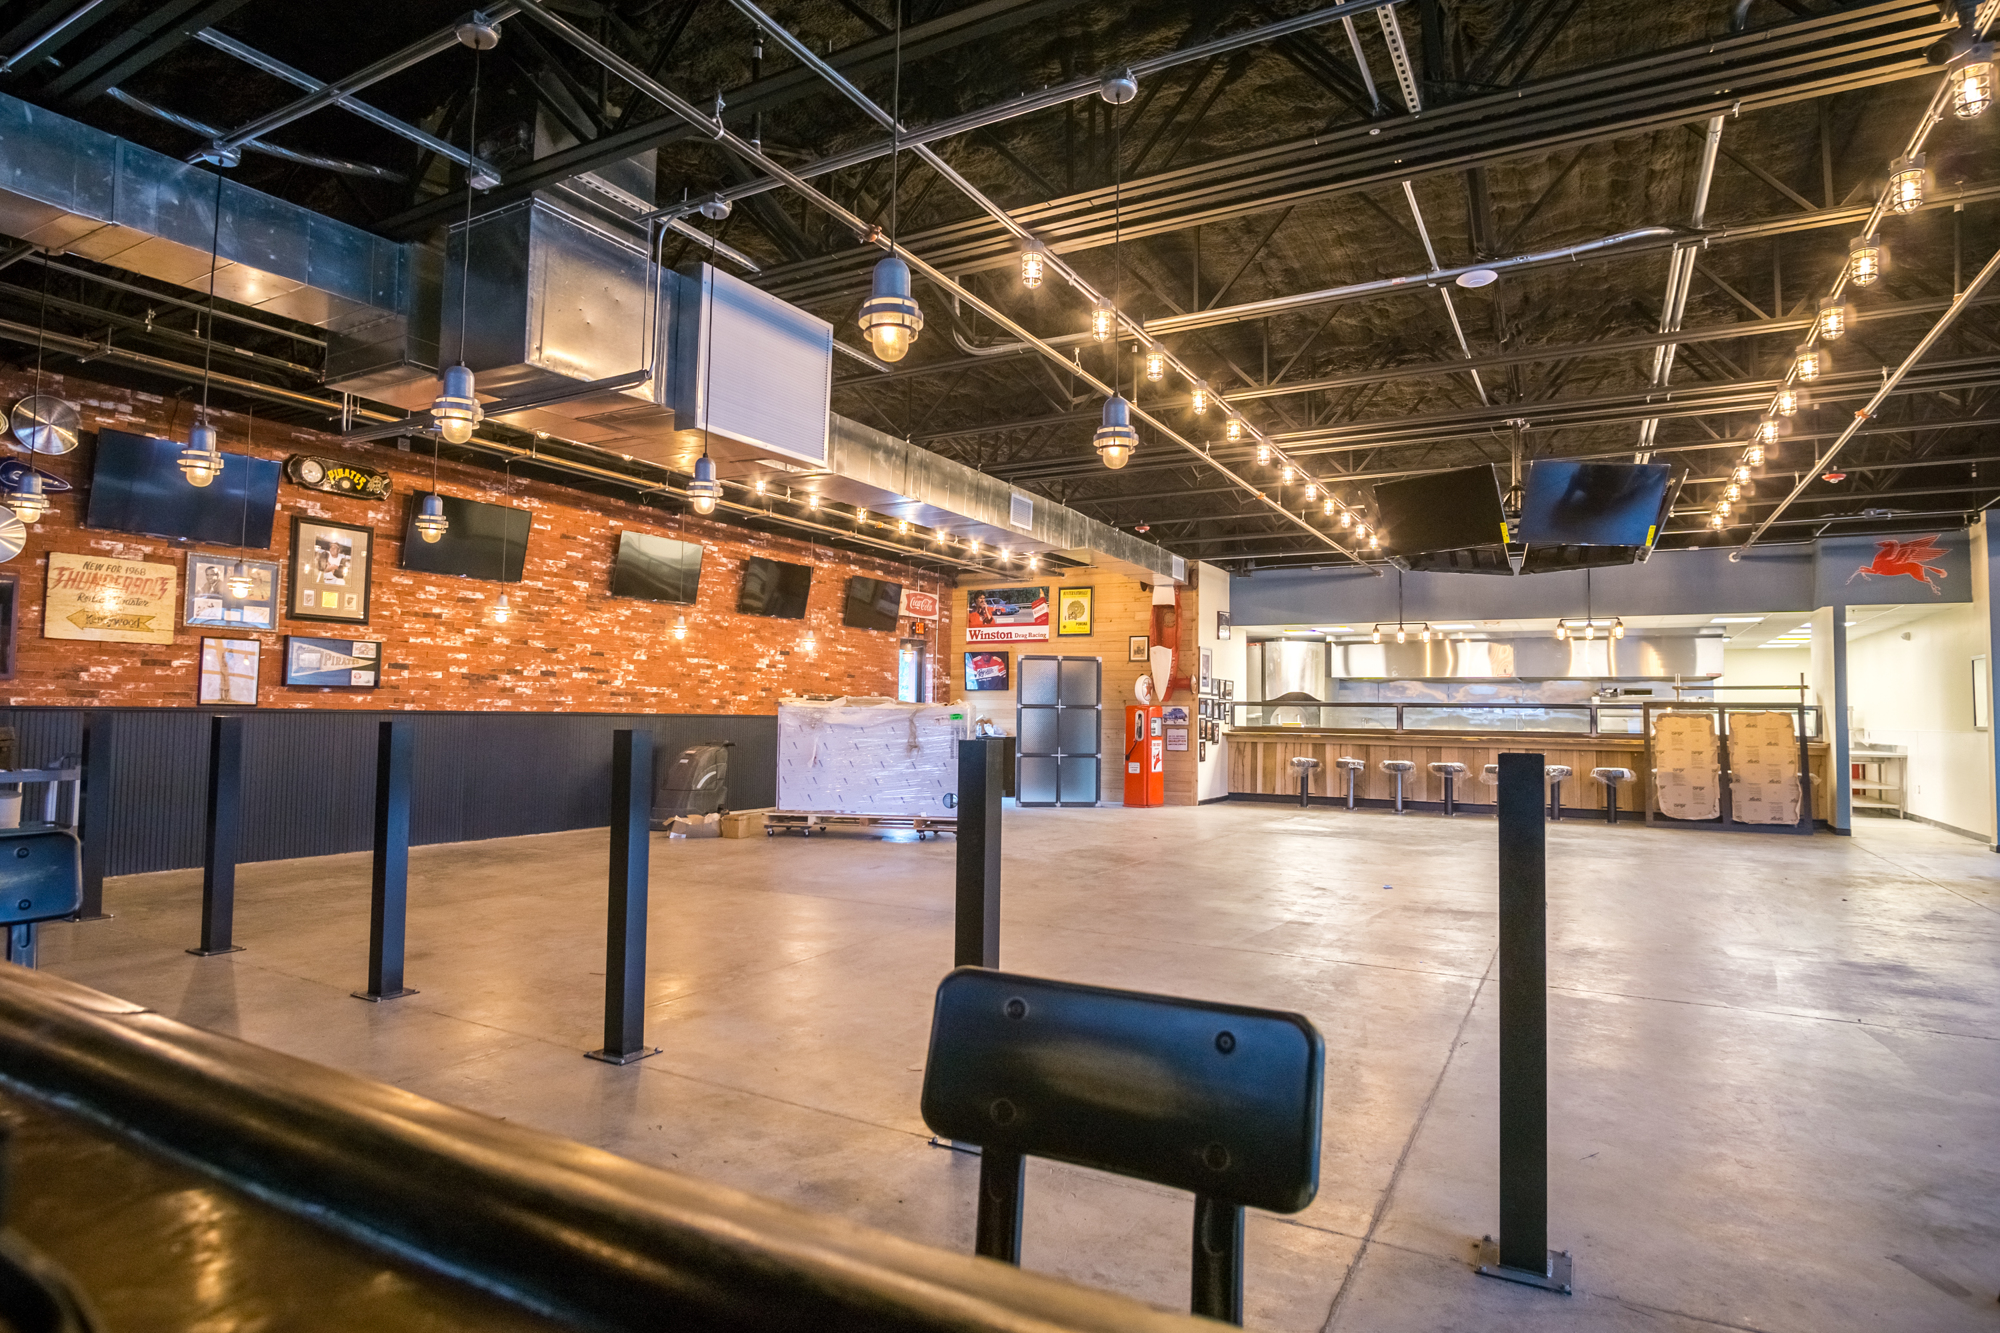 The interior of the new Giuseppe's Steel City Pizza restaurant will feature similar decor to its predecessor next door. Photo by Zach Fedewa